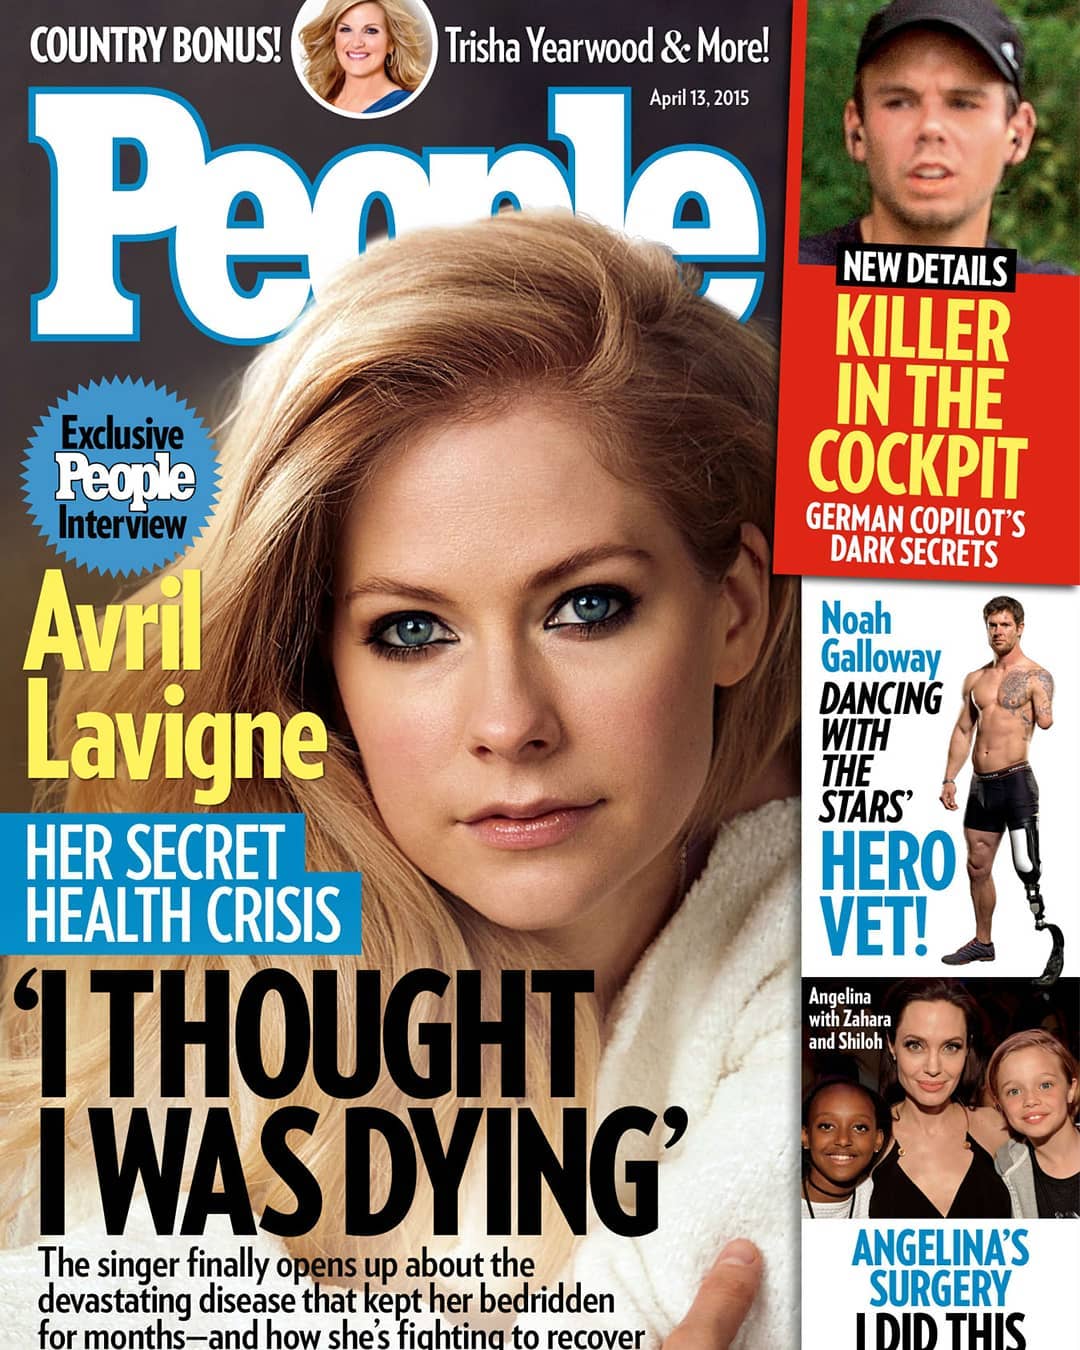 April 2015 People magazine issue, with Avril Lavigne on the cover and her secret health crisis